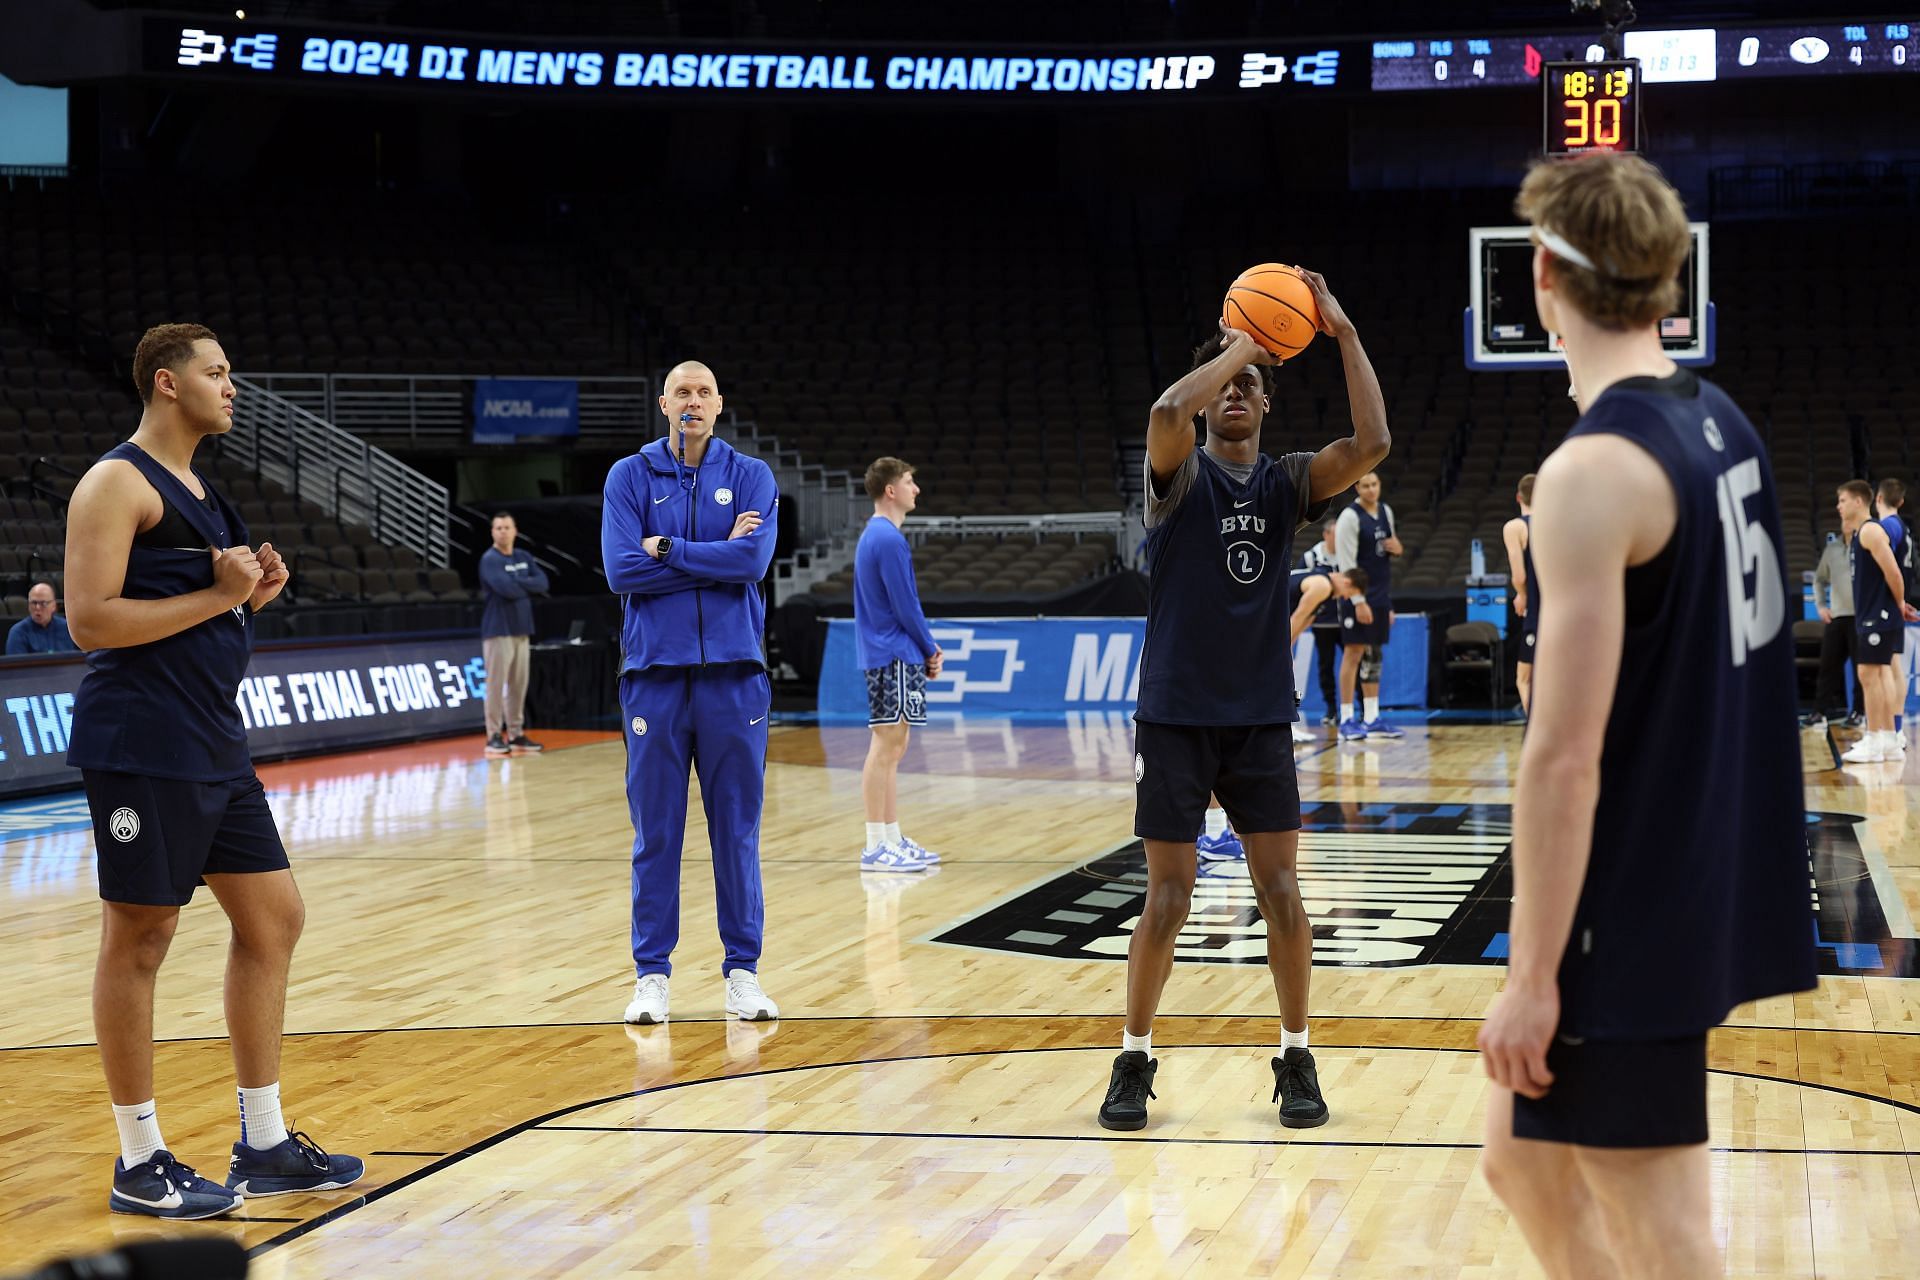 Jaxson Robinson #2 of the BYU Cougars shoots a free throw as head coach Mark Pope watches during practice.